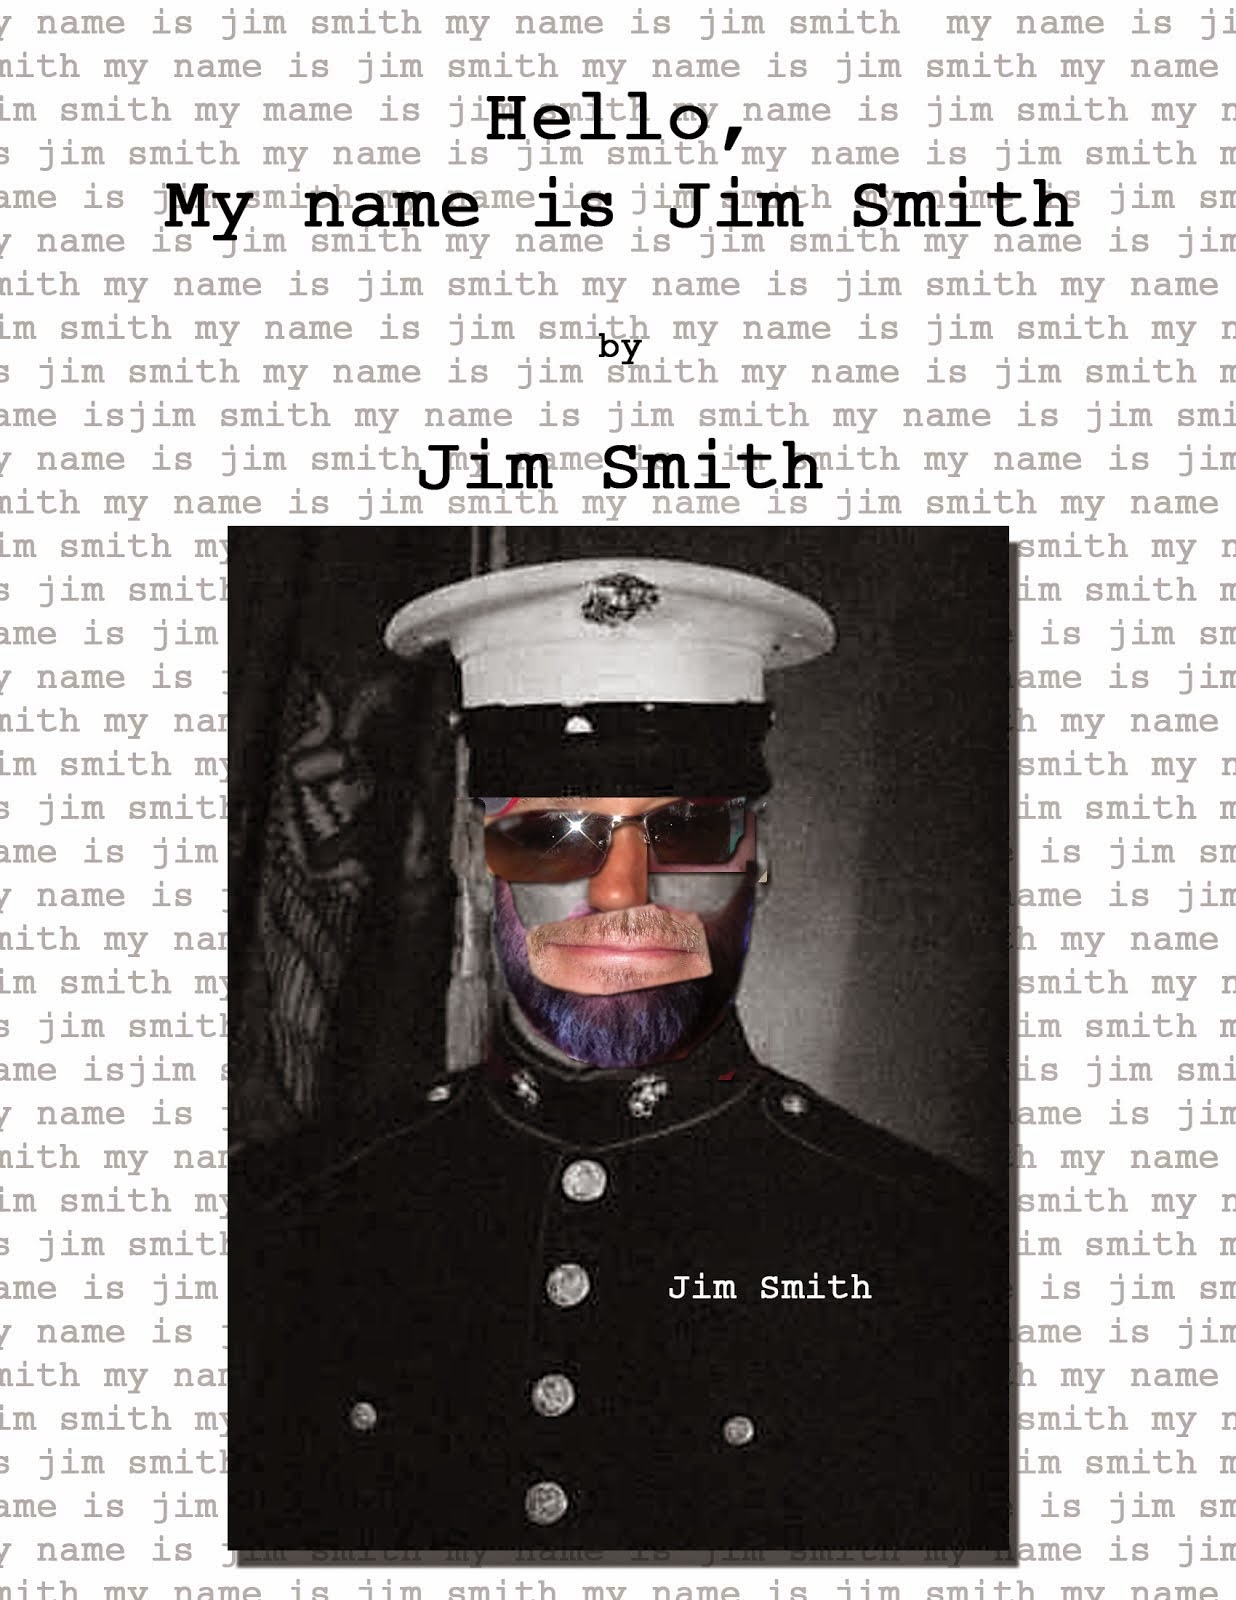 Hello, My Name is Jim Smith